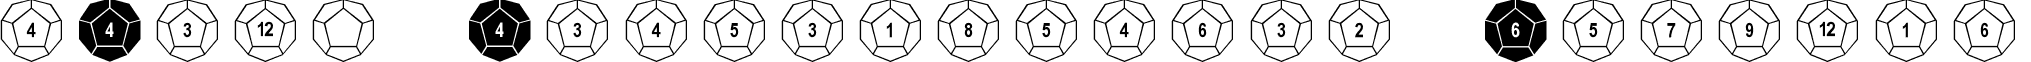 dPoly Dodecahedron Regular dPoly Dodecahedron.ttf